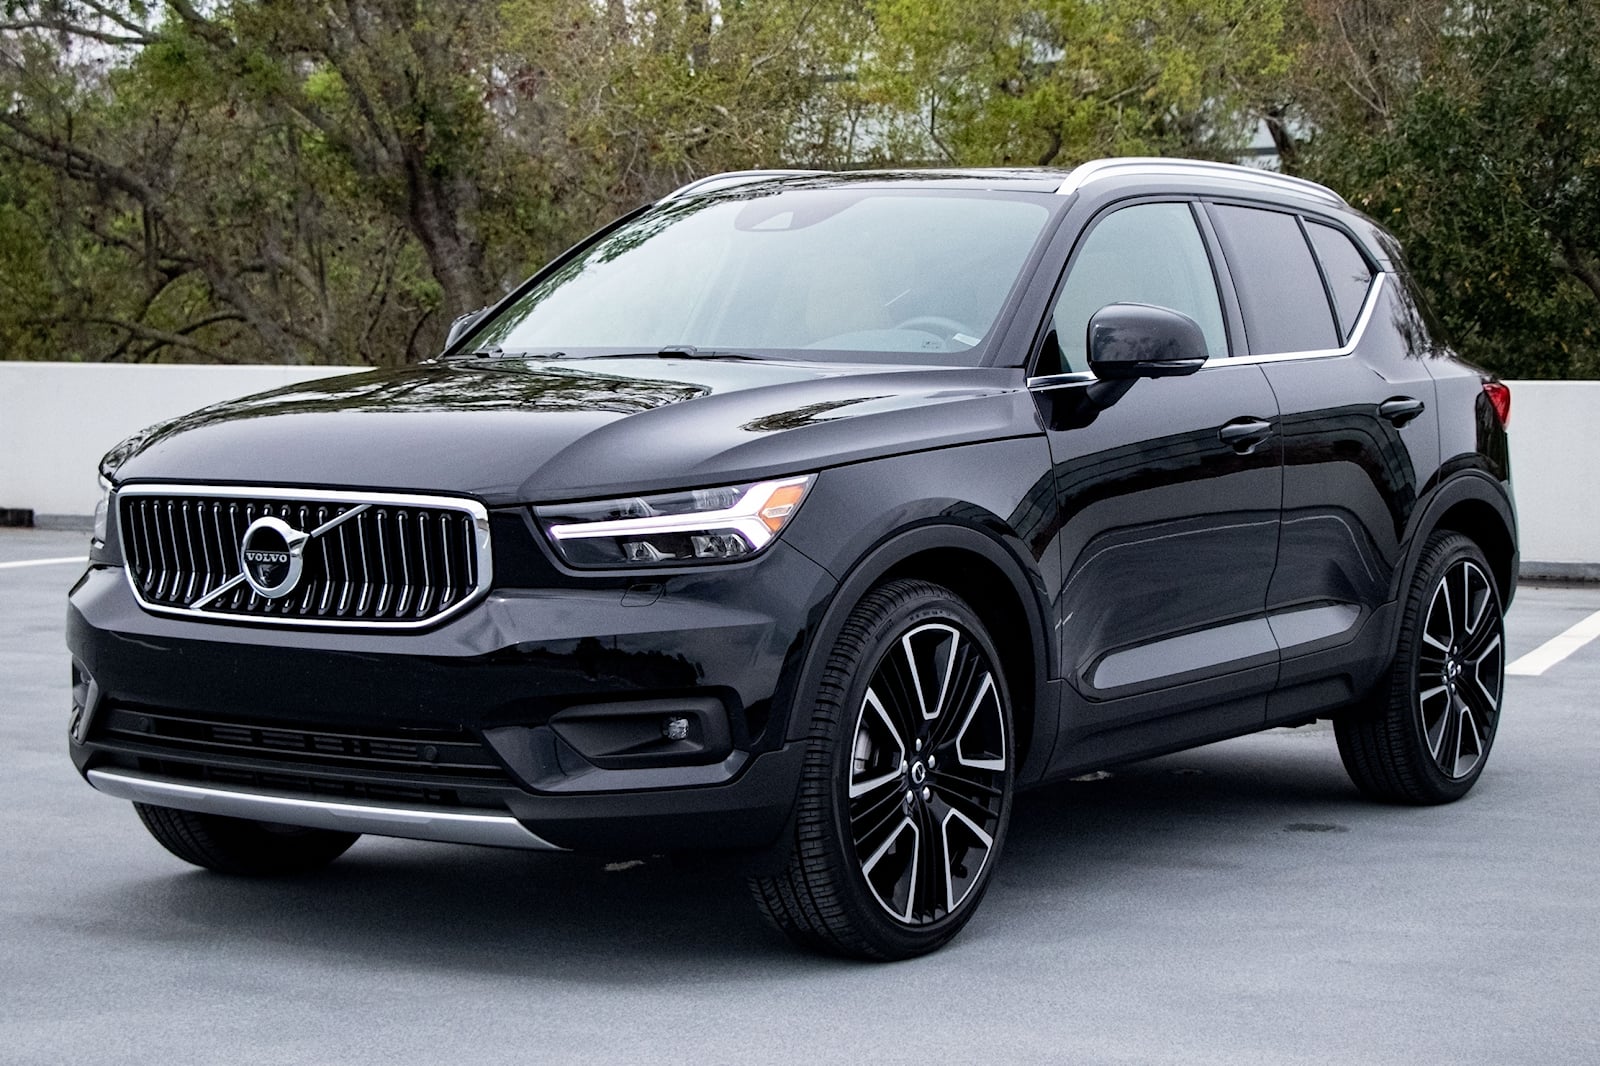 Used Volvo XC40 For Sale in Stafford, TX CarBuzz